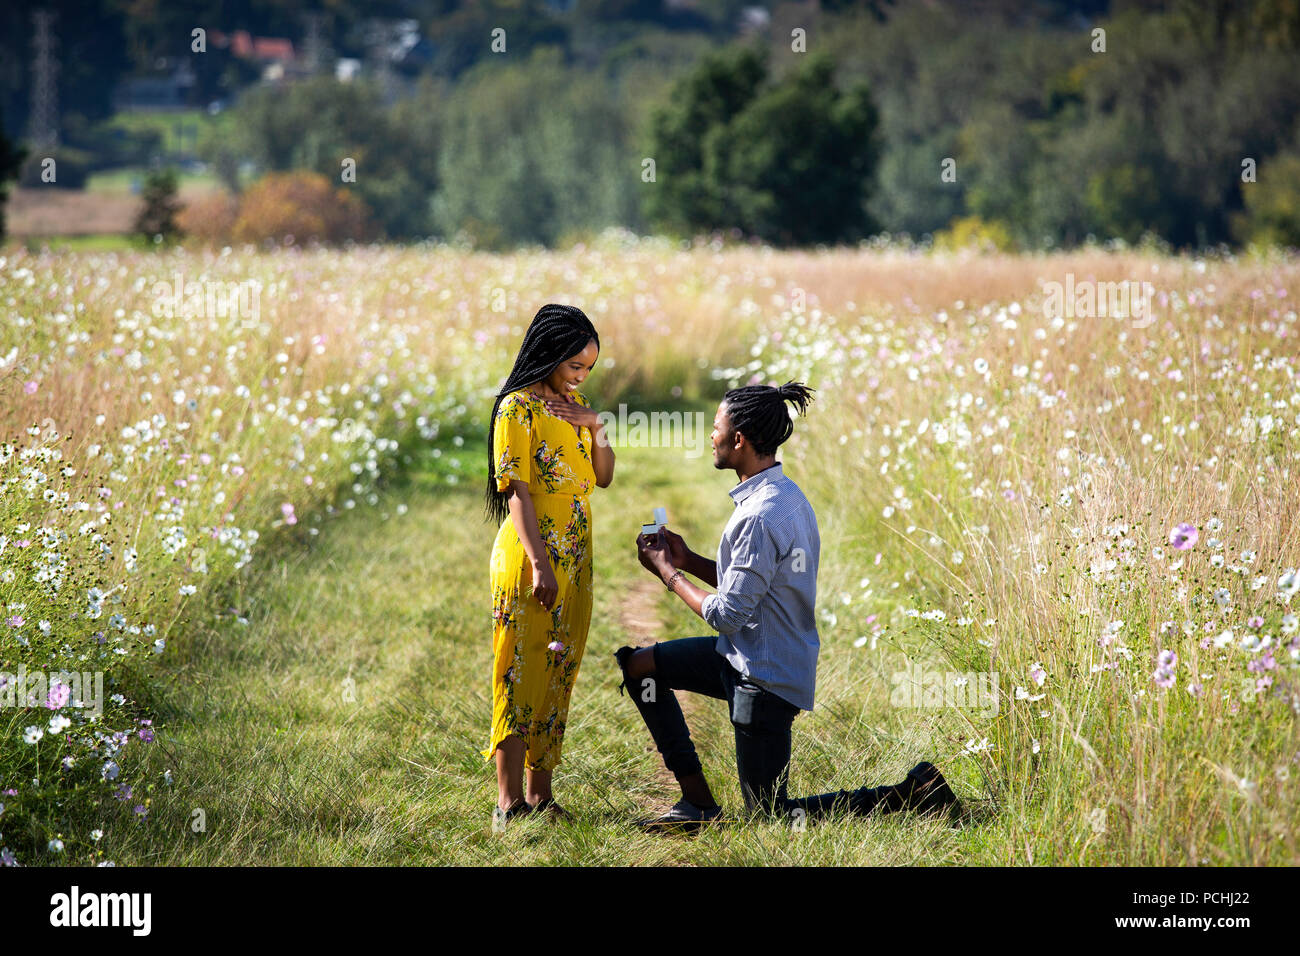 African man proposing to African woman in field Stock Photo